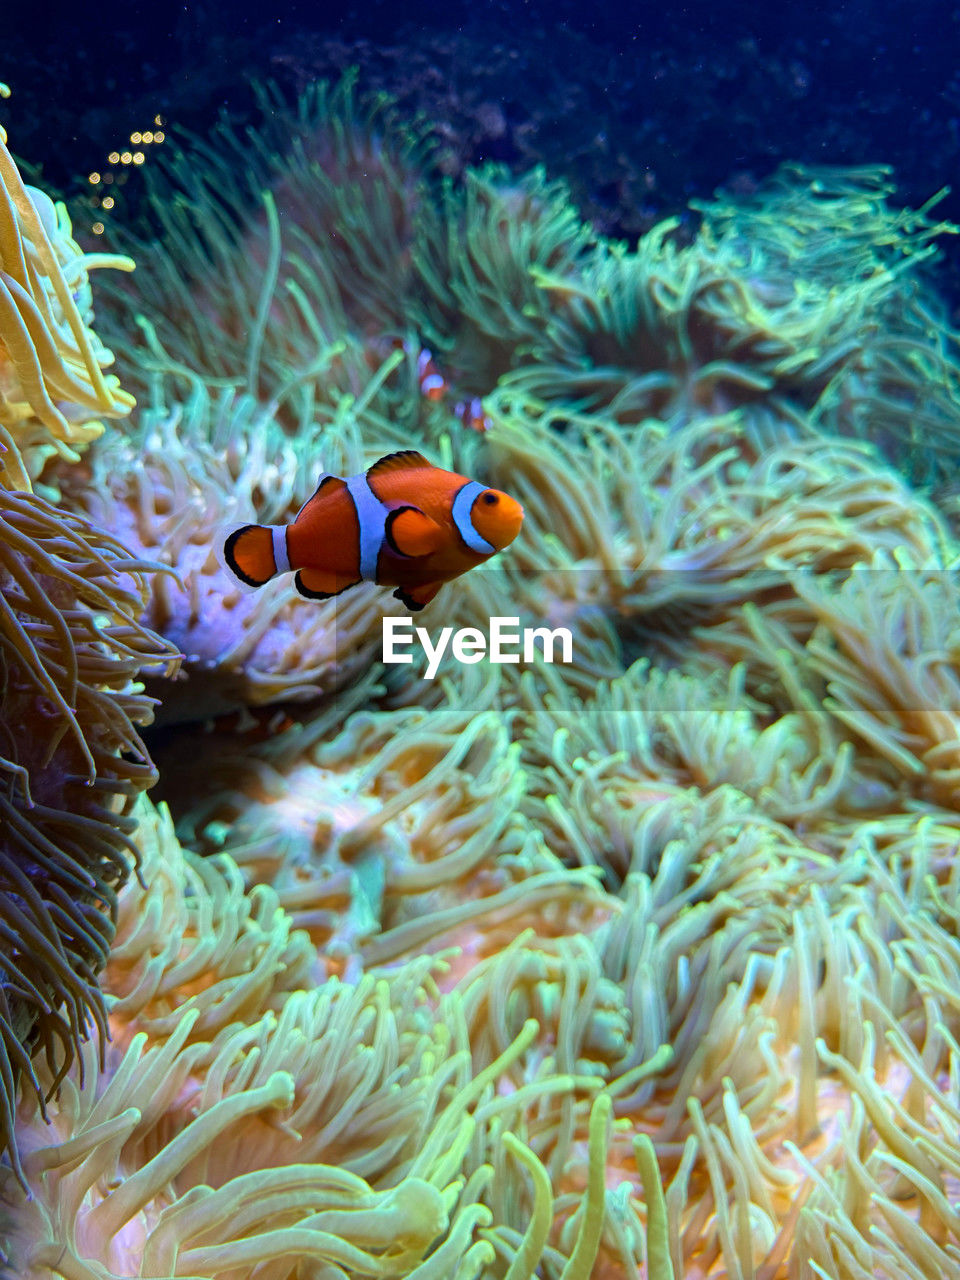 animal wildlife, animal themes, wildlife, animal, sea, underwater, sea life, water, marine, undersea, clown fish, fish, coral, nature, sea anemone, coral reef, coral reef fish, symbiotic relationship, beauty in nature, reef, aquarium, marine biology, natural environment, pomacentridae, no people, tropical fish, swimming, stony coral, one animal, zoology, outdoors